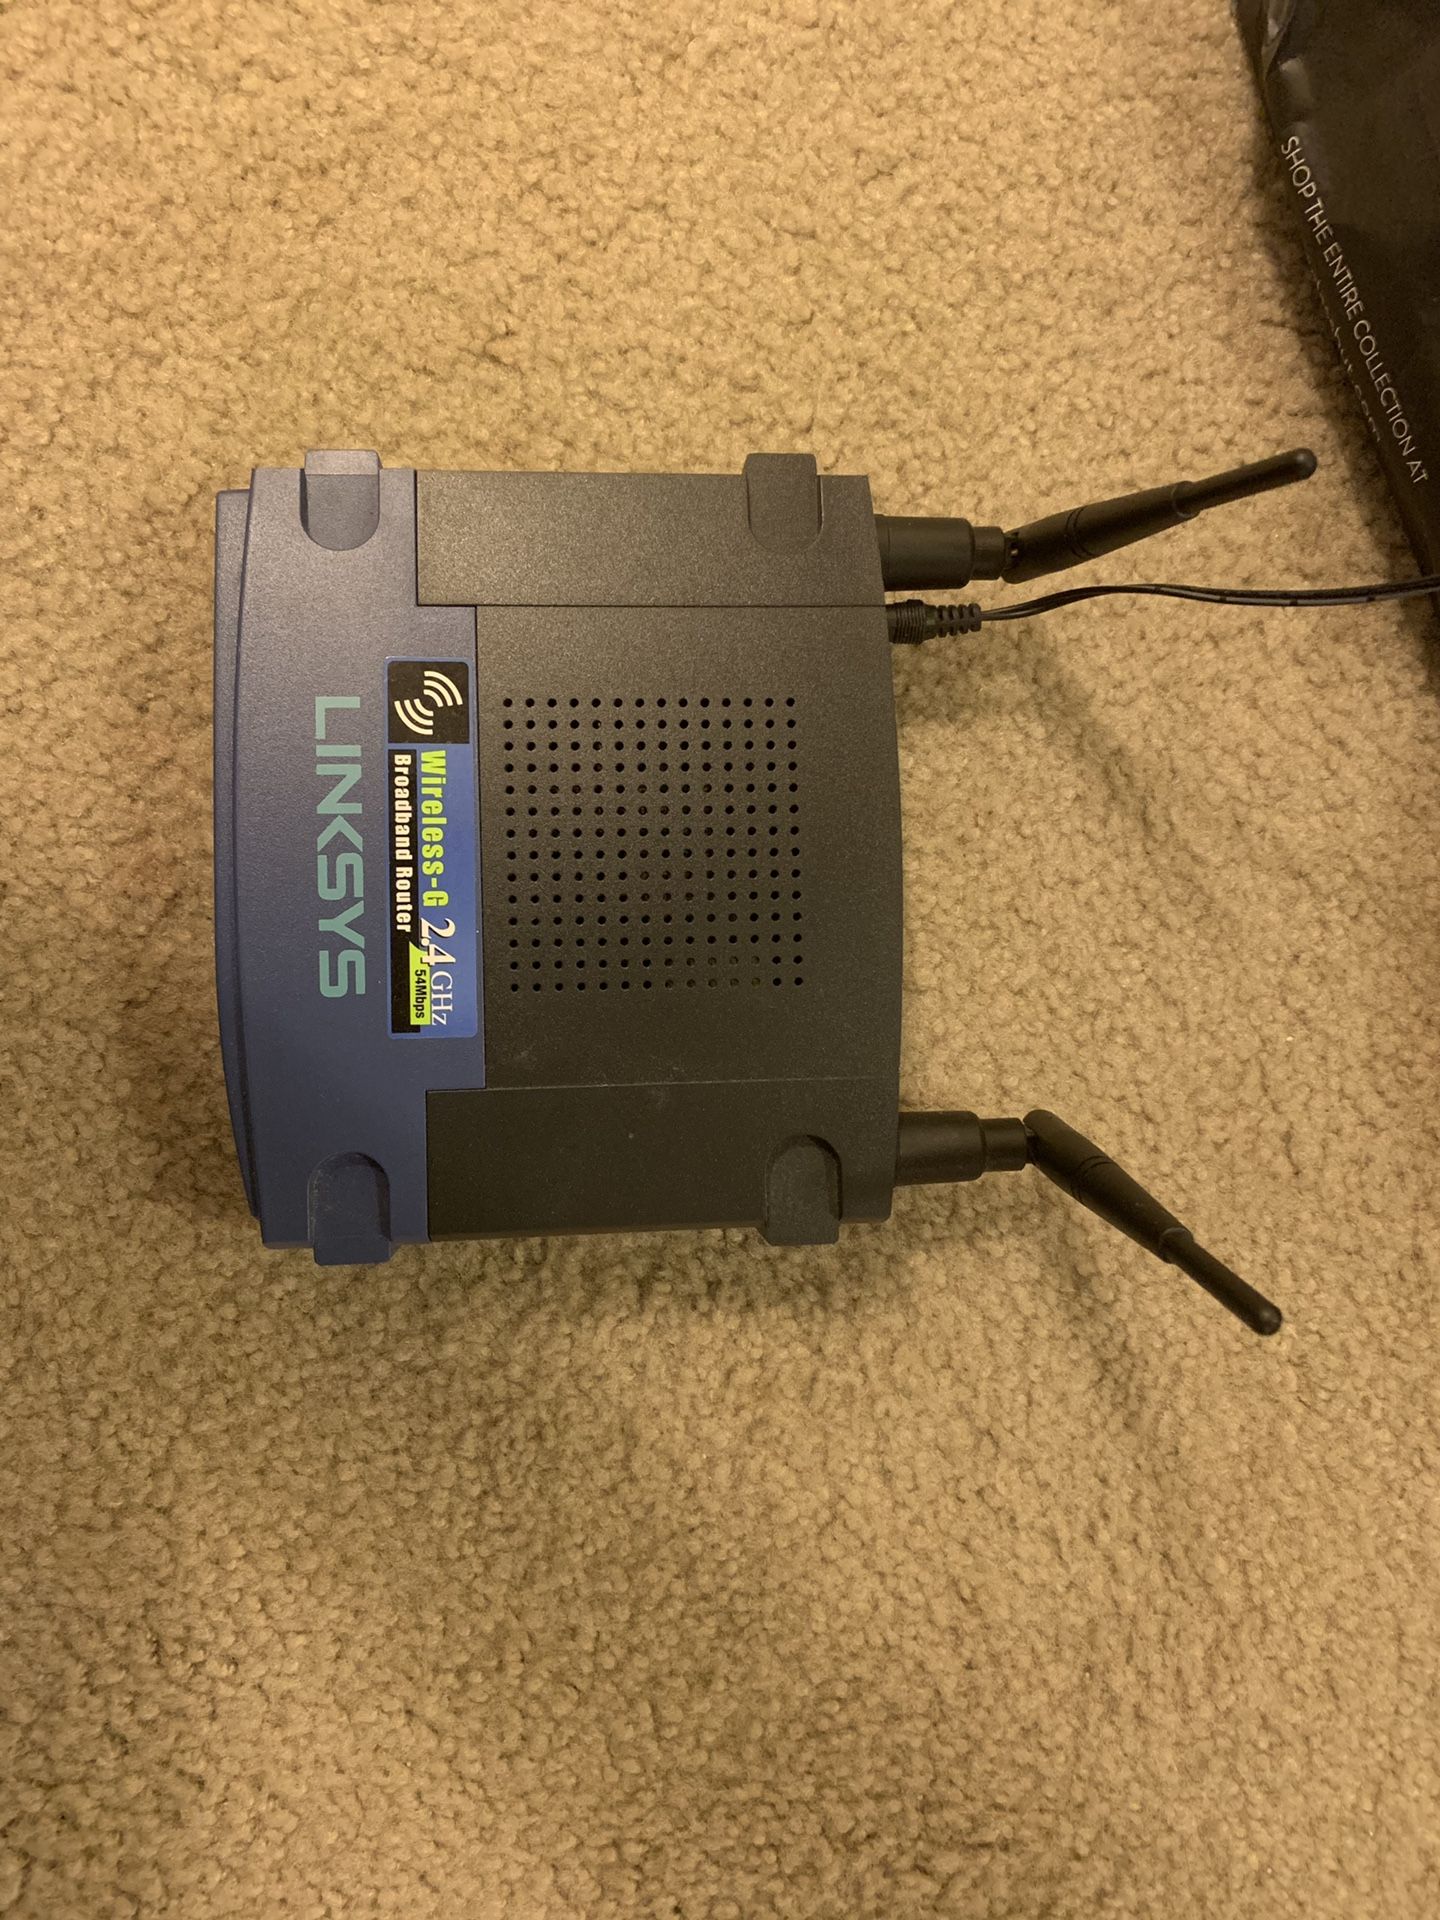 Linksys router wrt54gl